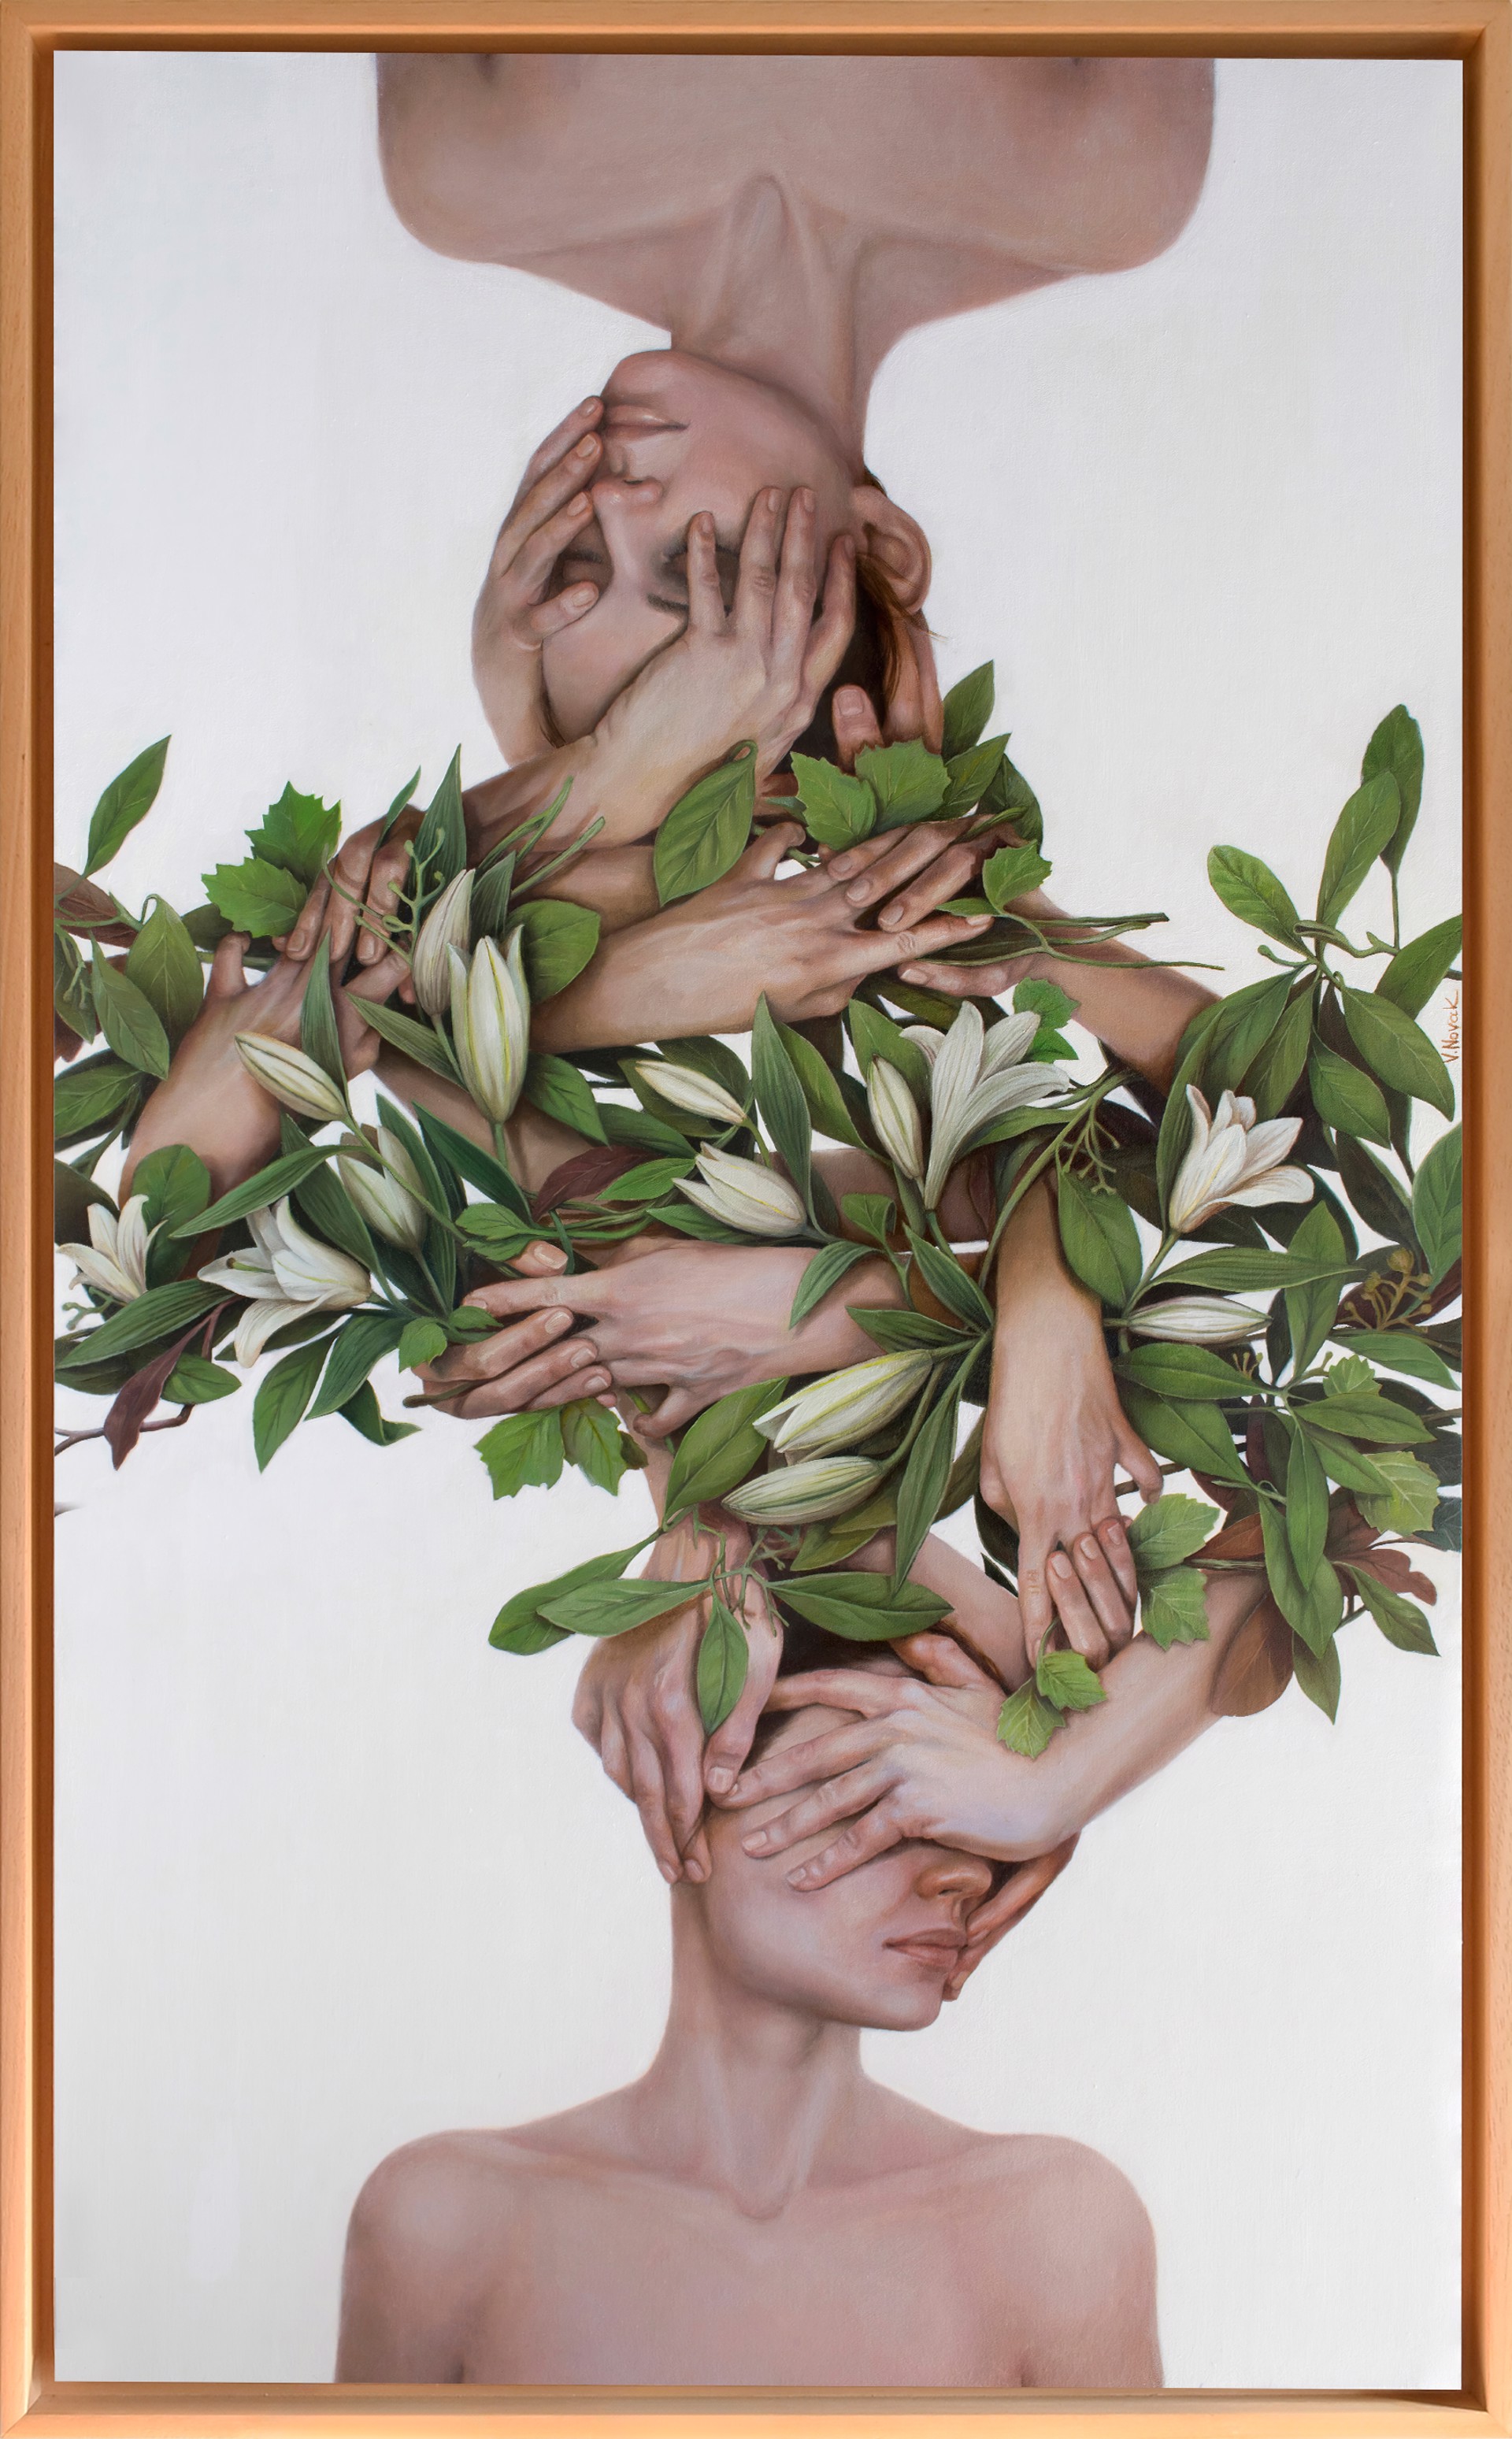 "With Kindness" by Victoria Novak, an oil painting depicting multiple hands gently holding various green leaves and white flower petals, set against a light background.